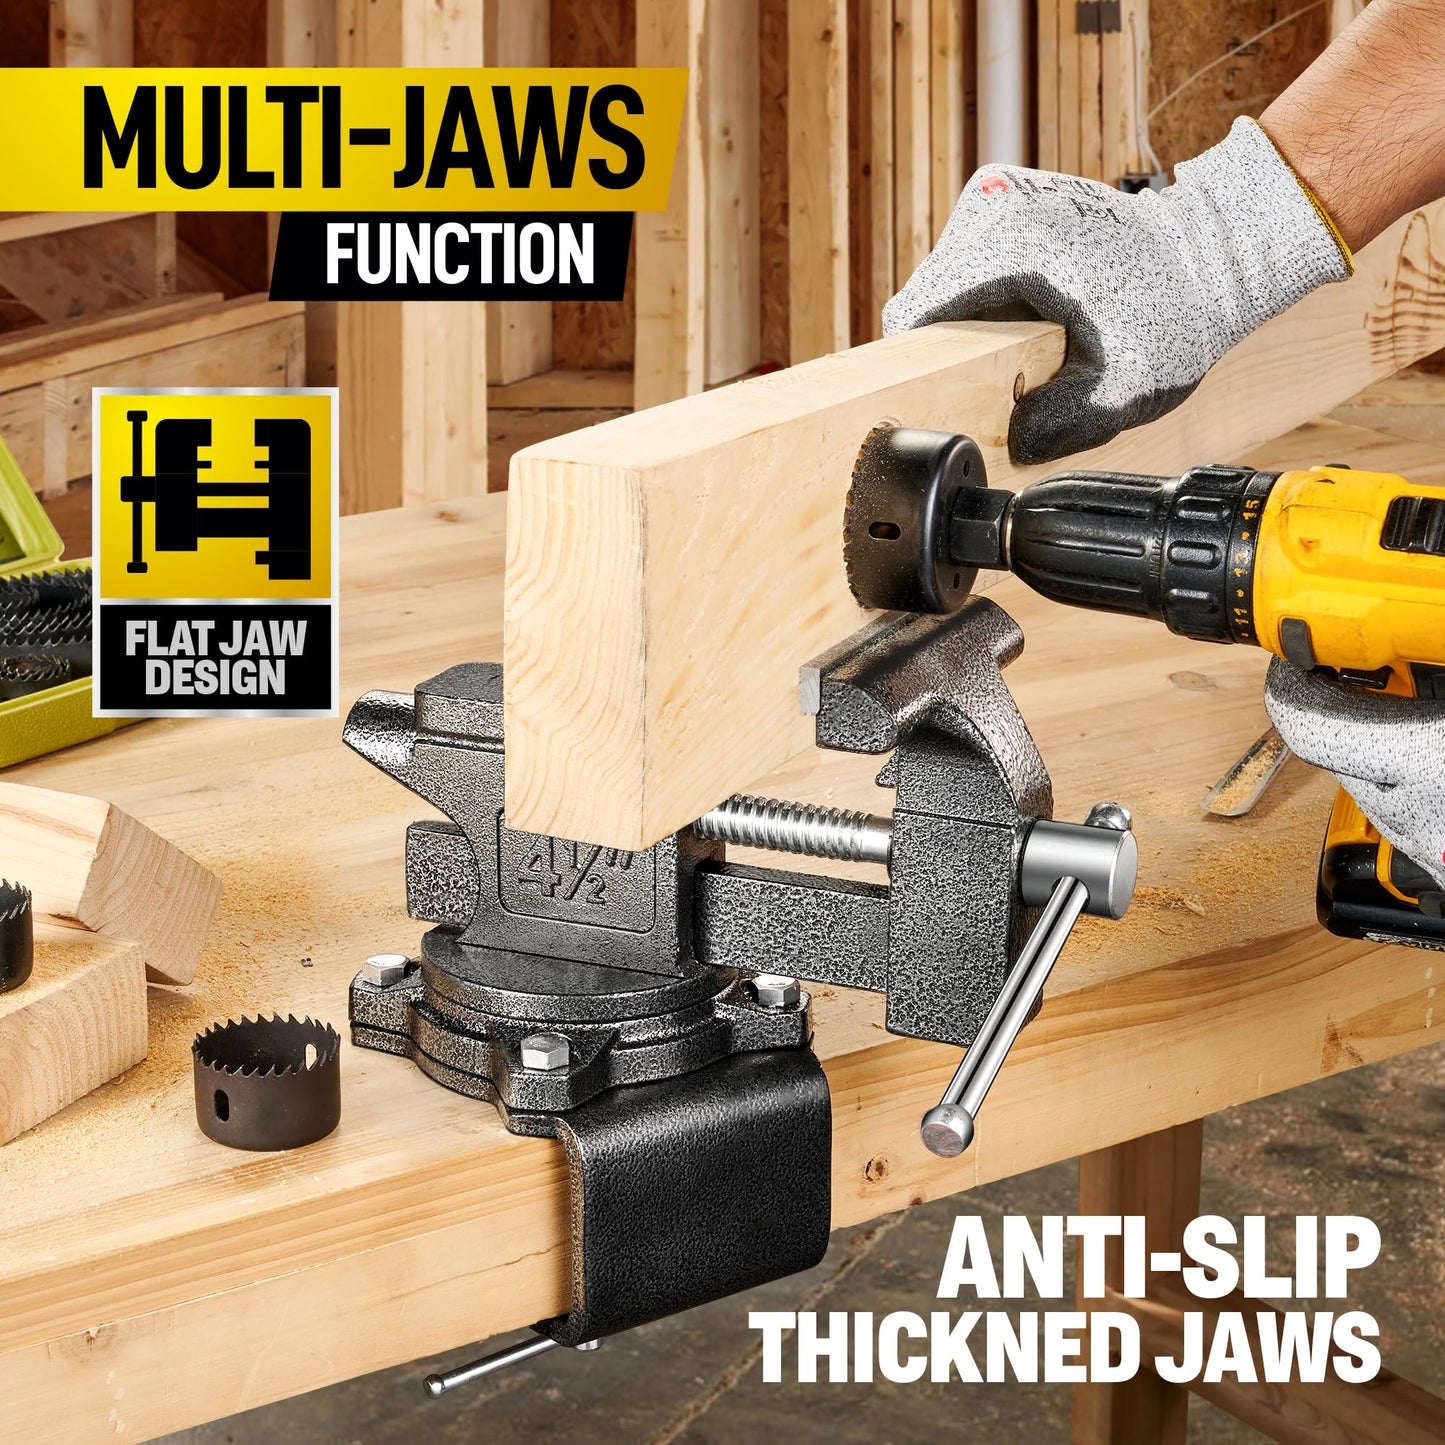 Dual-Purpose Bench Vise 4.5 Inch, Table Vise Clamping Heavy Duty for Workbench Constructed with Cast Steel, Swivel Base, Pipe Jaw and Anvil for